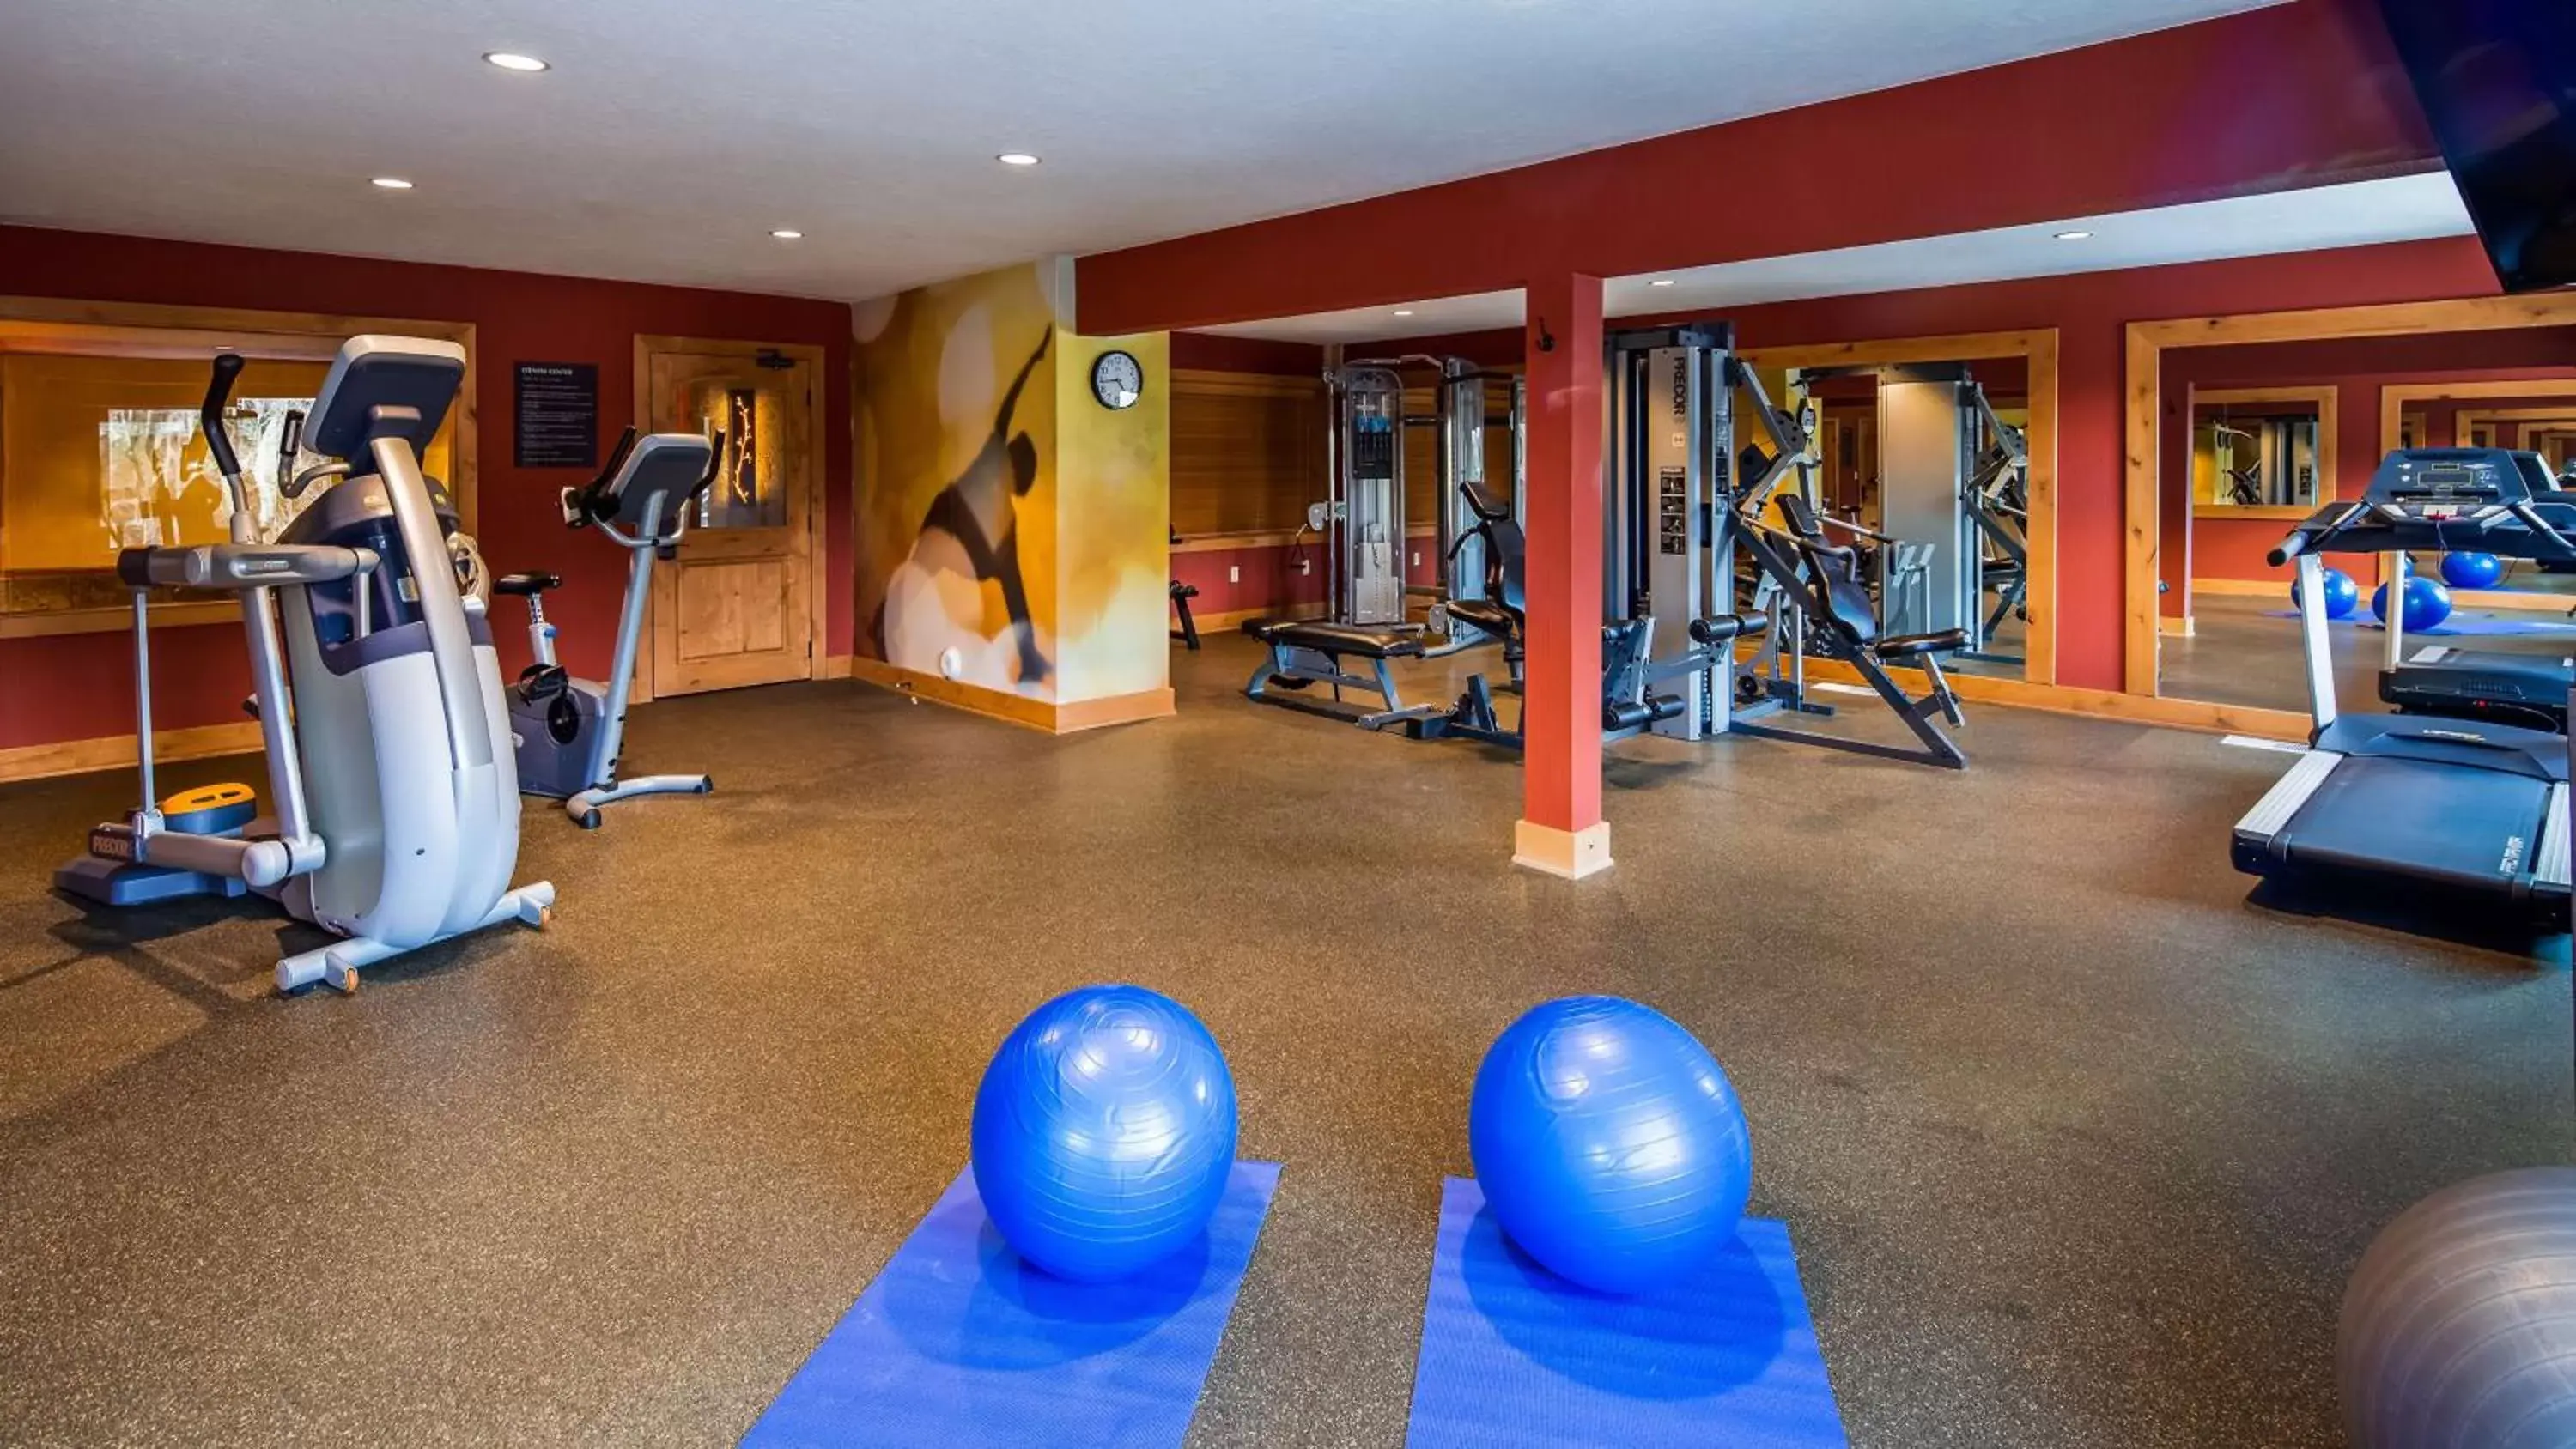 Activities, Fitness Center/Facilities in Brian Head Lodge